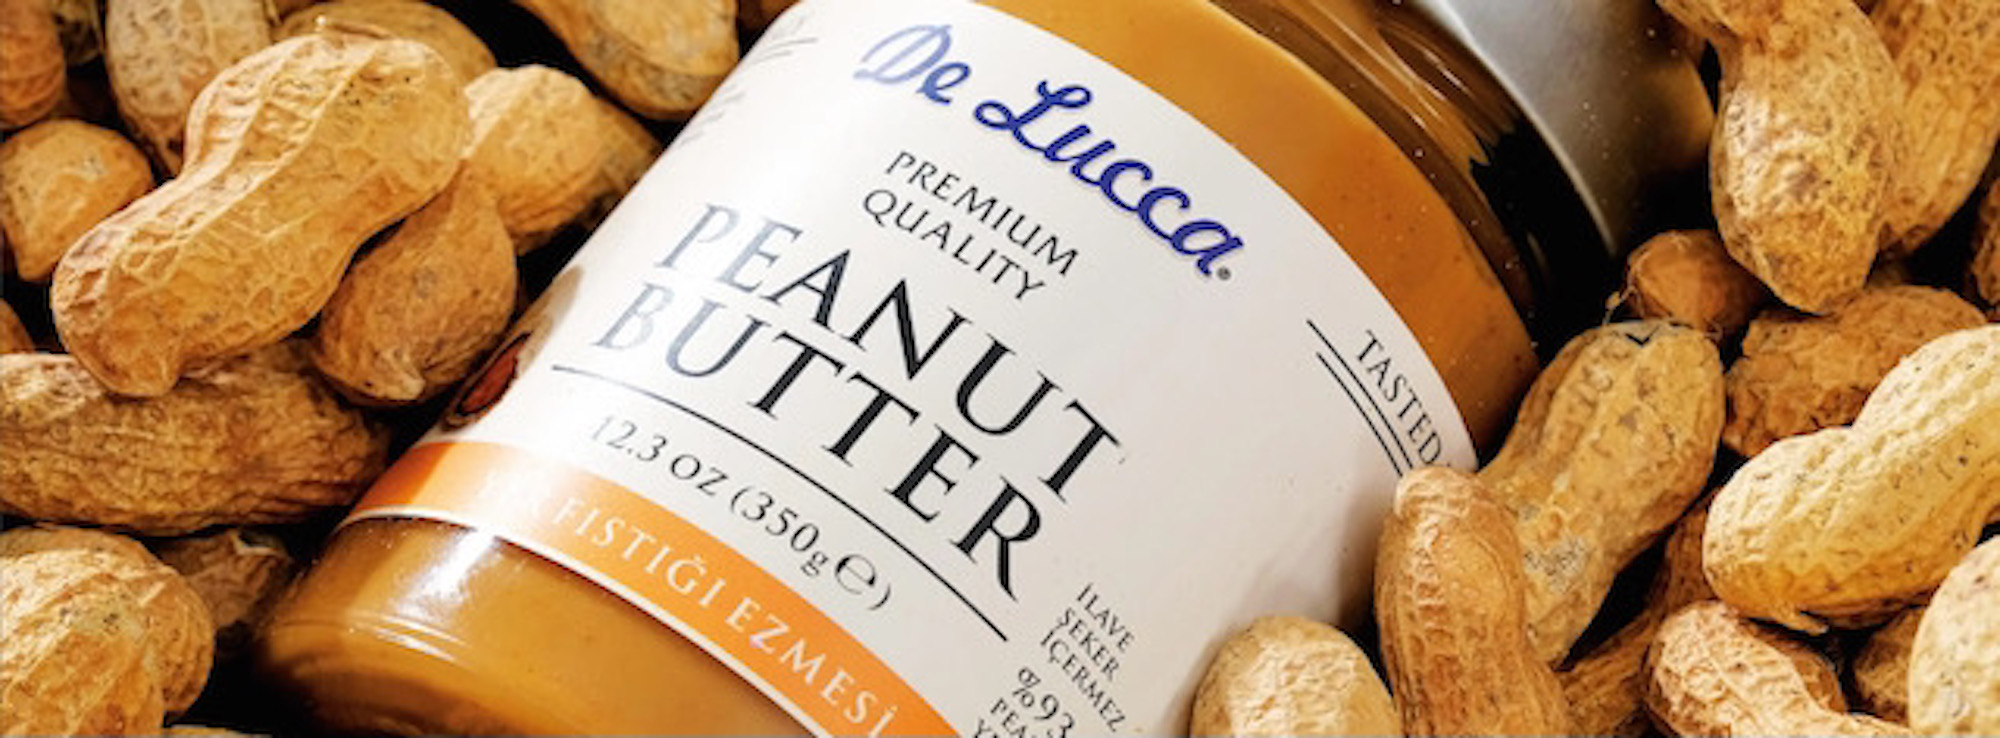 What Are the Benefits of Peanut Butter? - De Lucca Peanut Butter